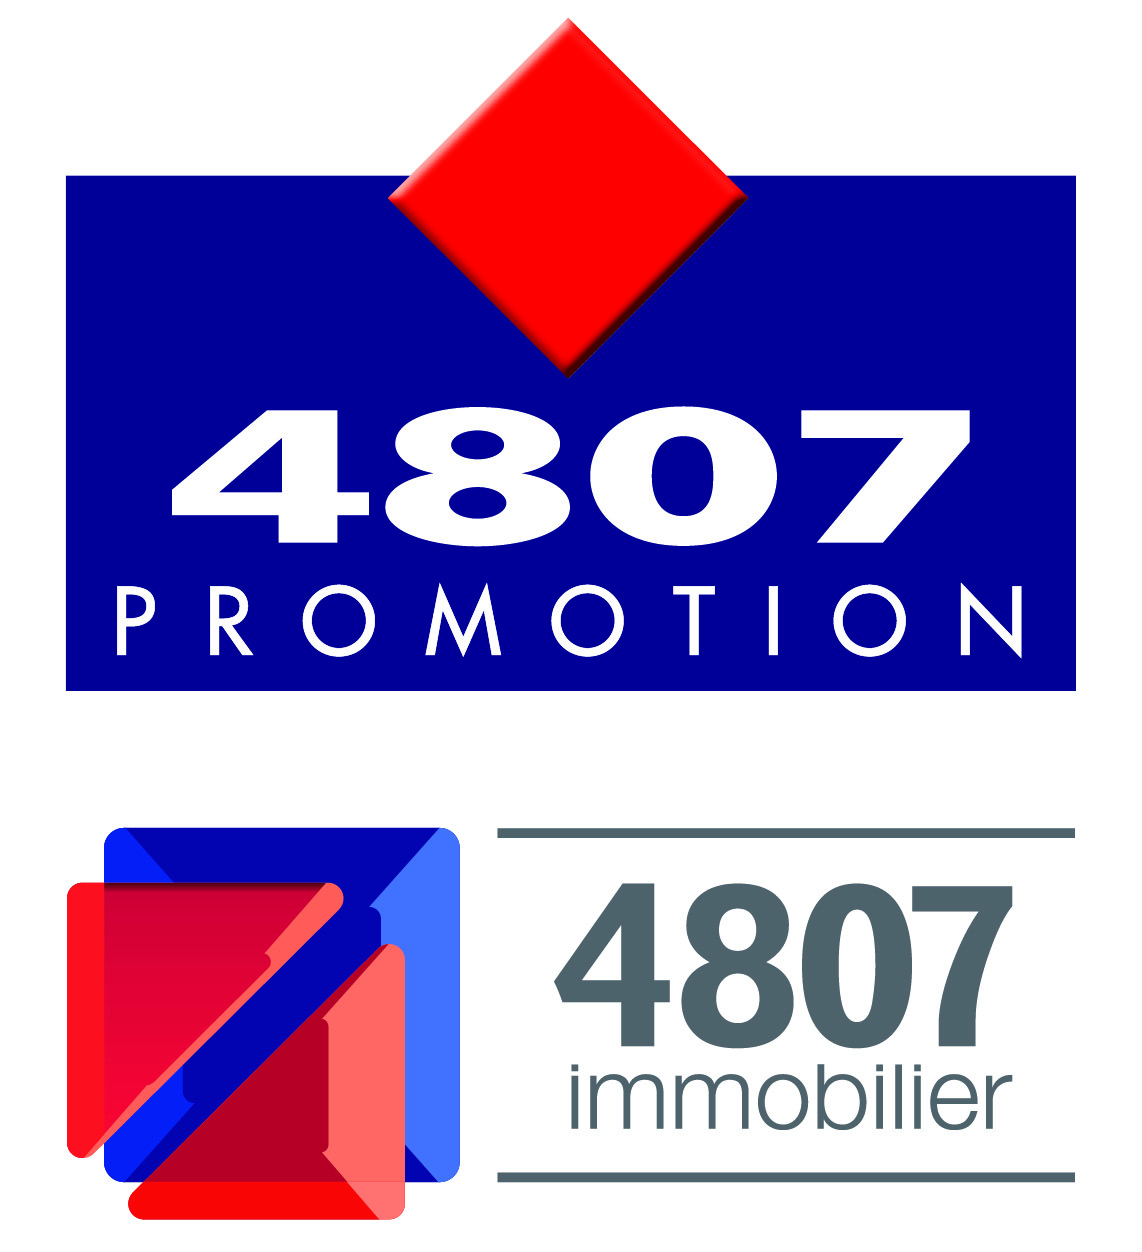 4807 IMMOBILIER /4807 PROMOTION